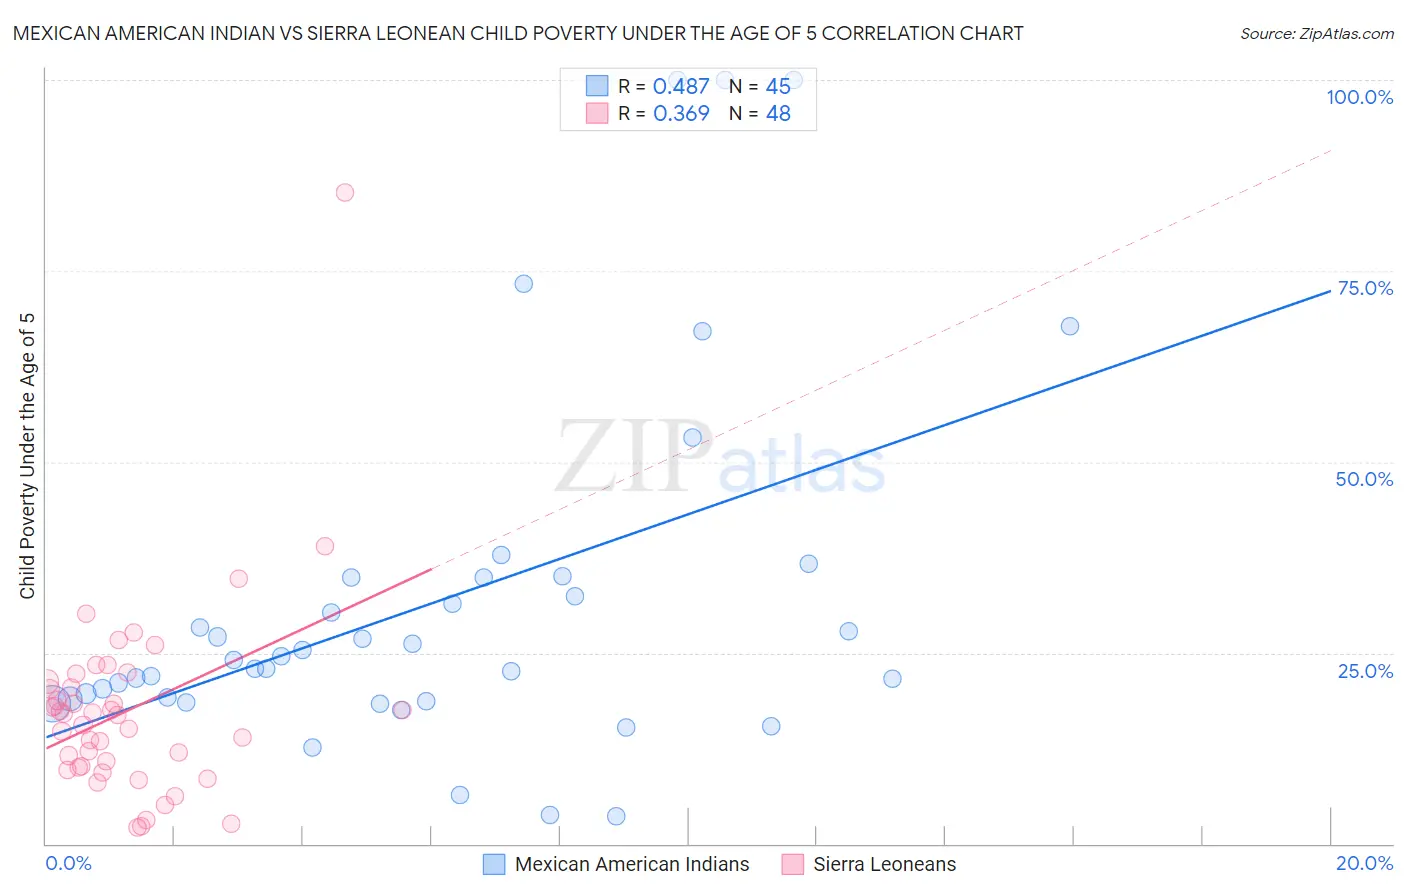 Mexican American Indian vs Sierra Leonean Child Poverty Under the Age of 5